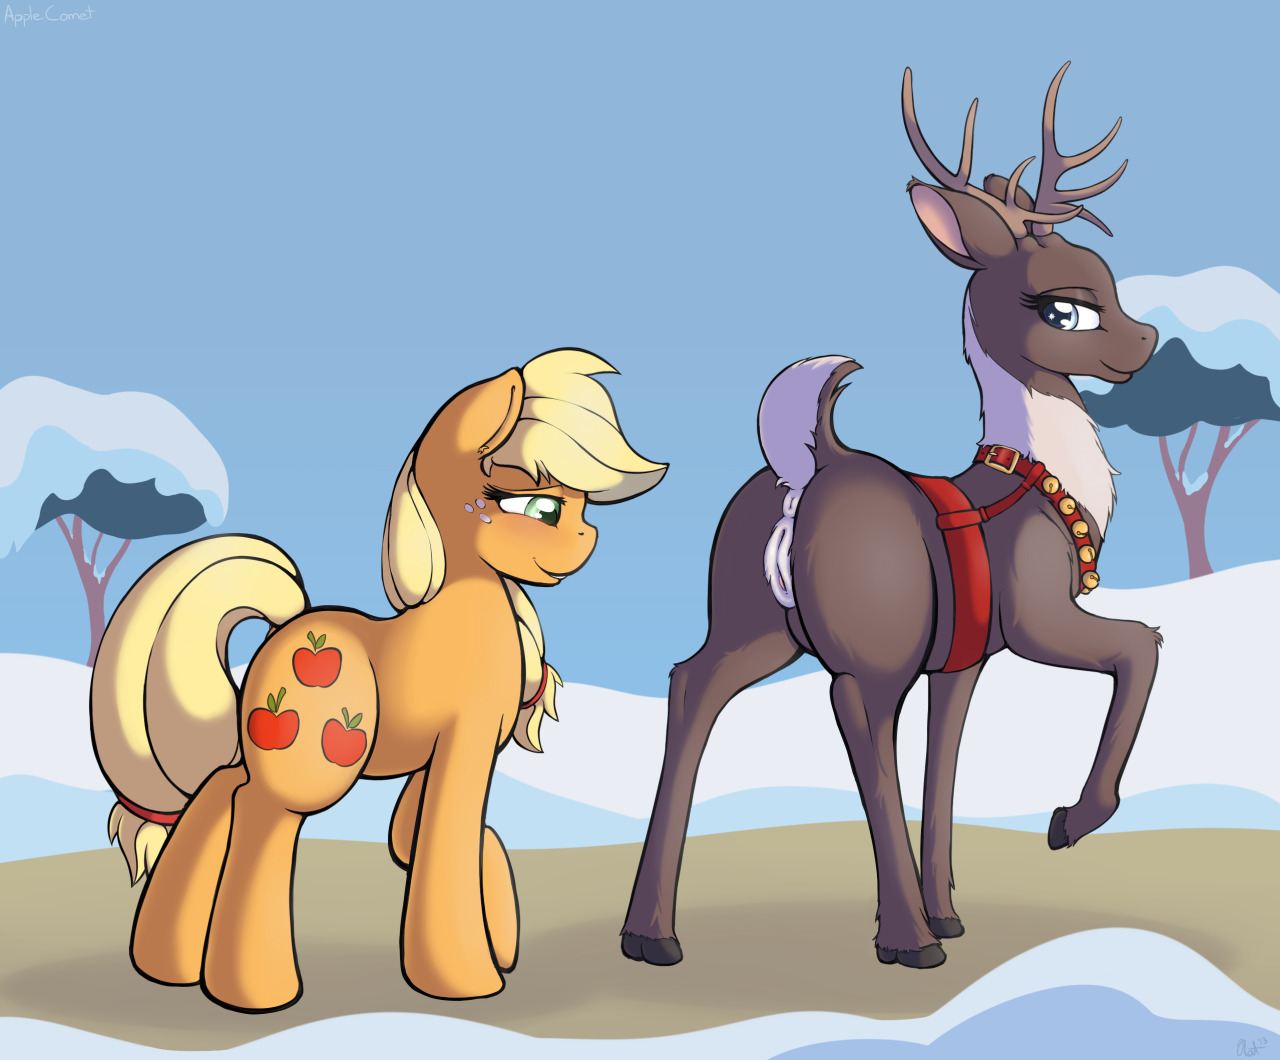 Happy Christmas Eve! Apparently Santa&rsquo;s Sleigh stopped in Ponyville and